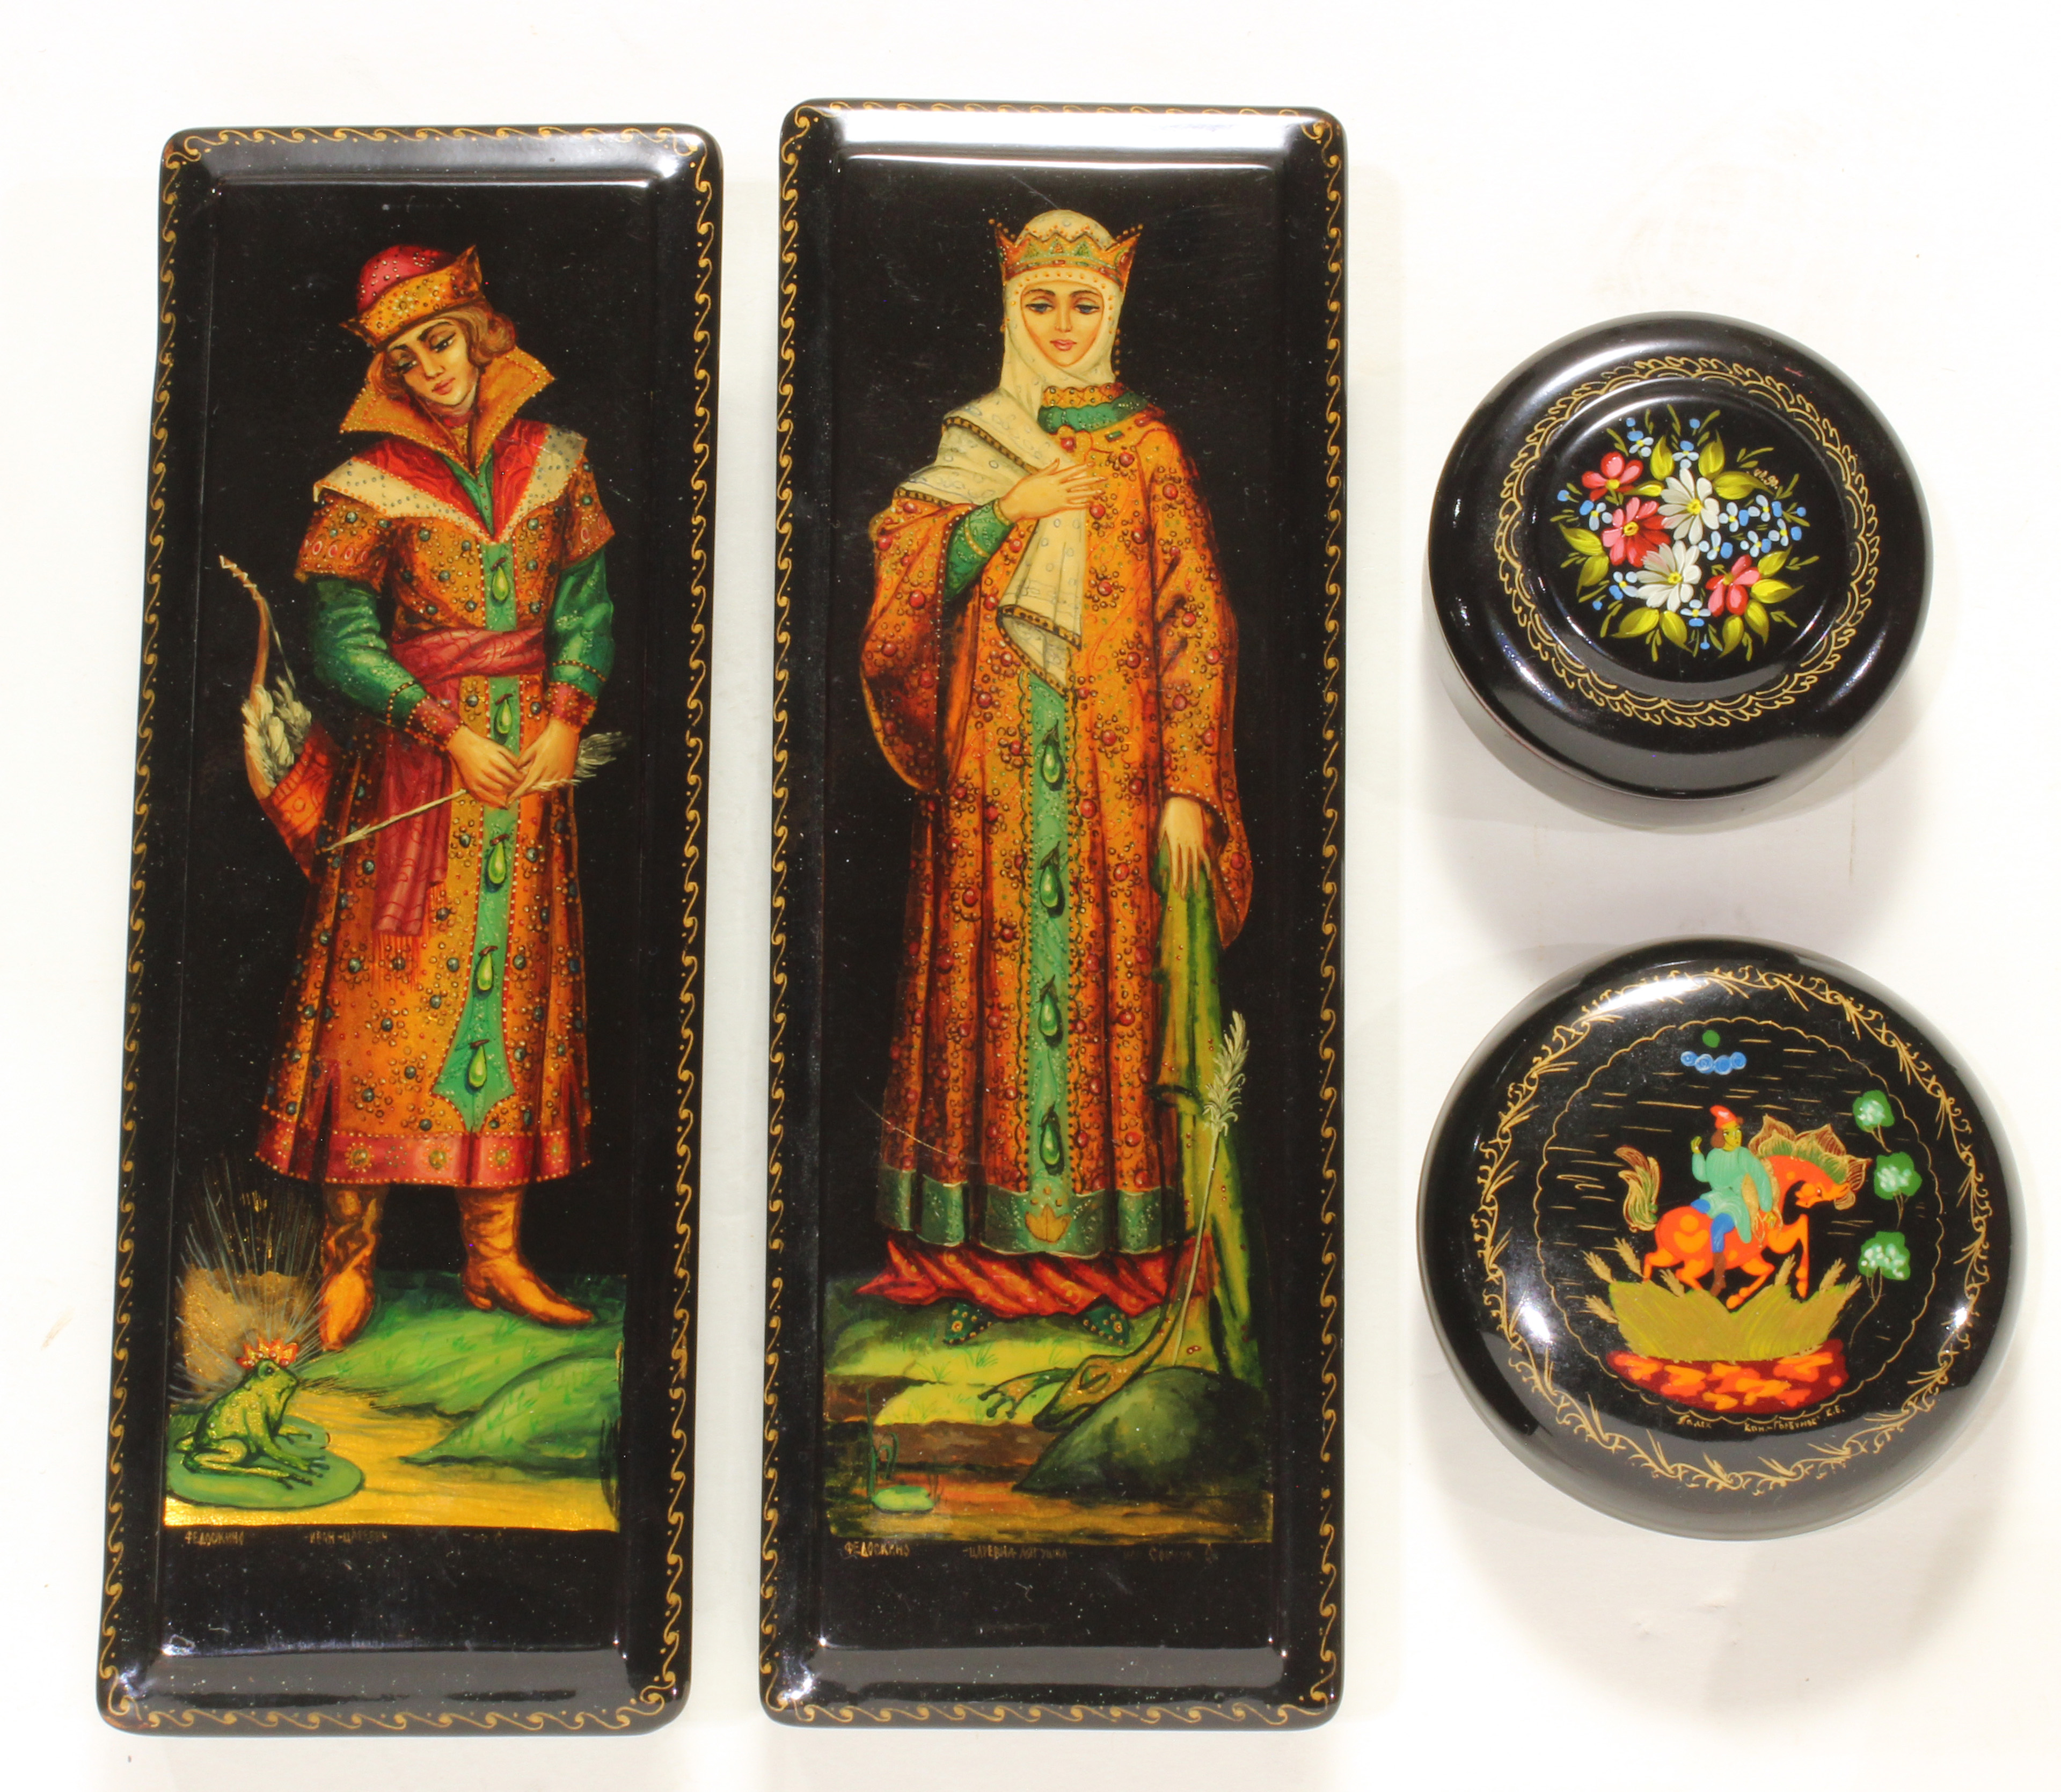  LOT OF 4 RUSSIAN LACQUER BOXES  3a6600